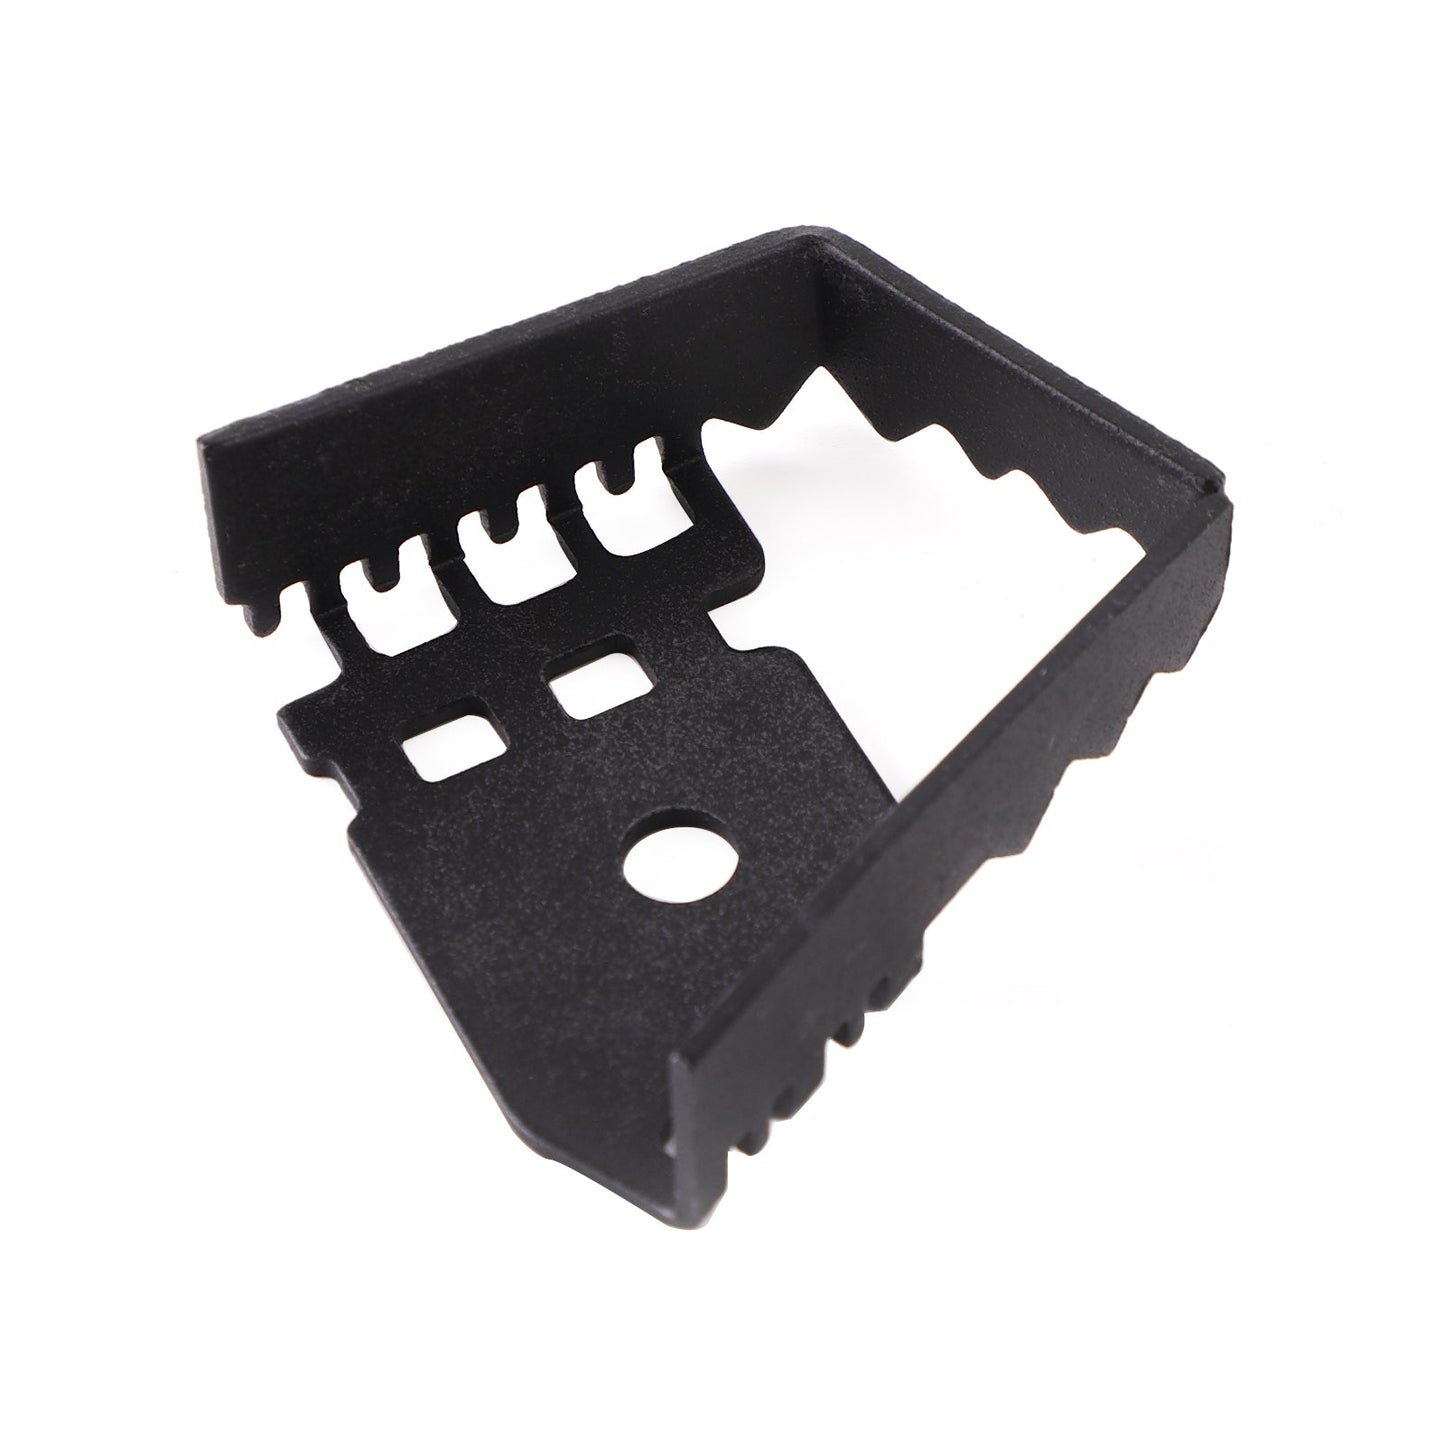 Brake Foot Pedal Extension Enlarge Black For Bmw R1200Gs F800Gs Adv F700 F650Gs